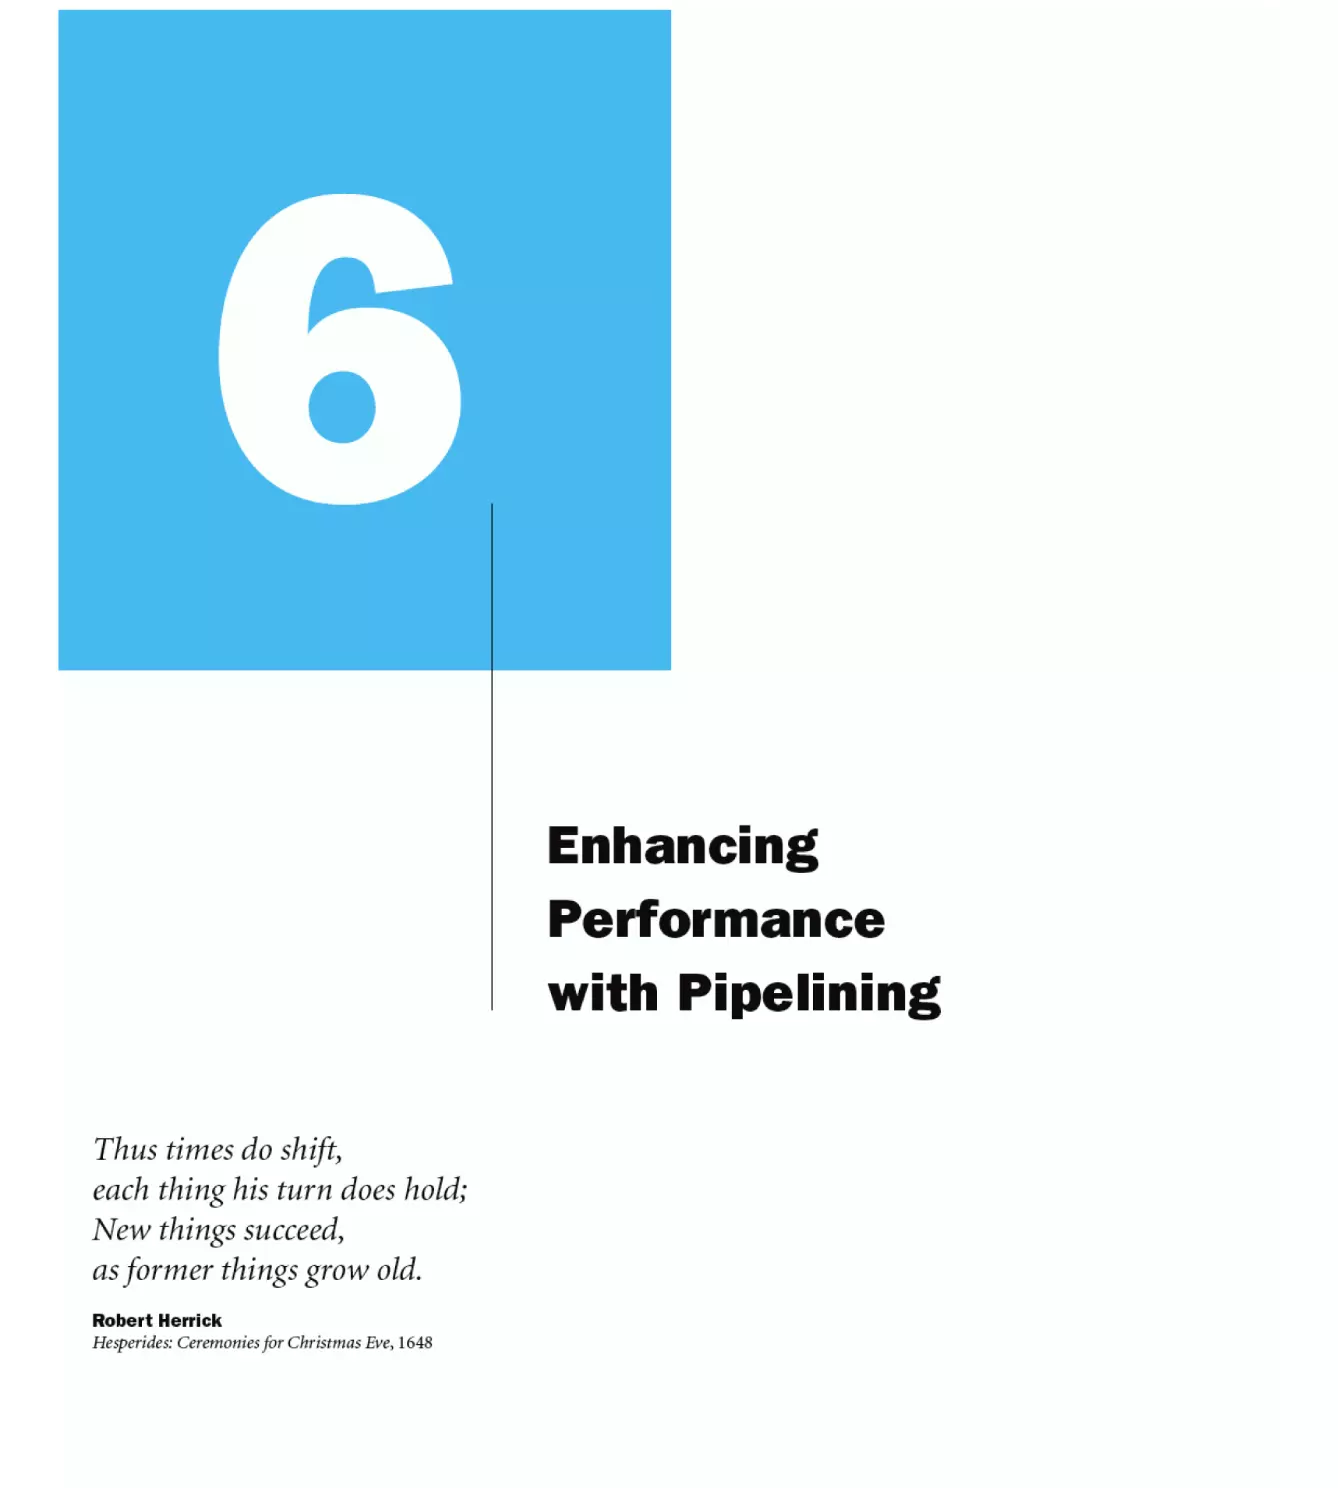 6. Enhancing Performance with Pipelining